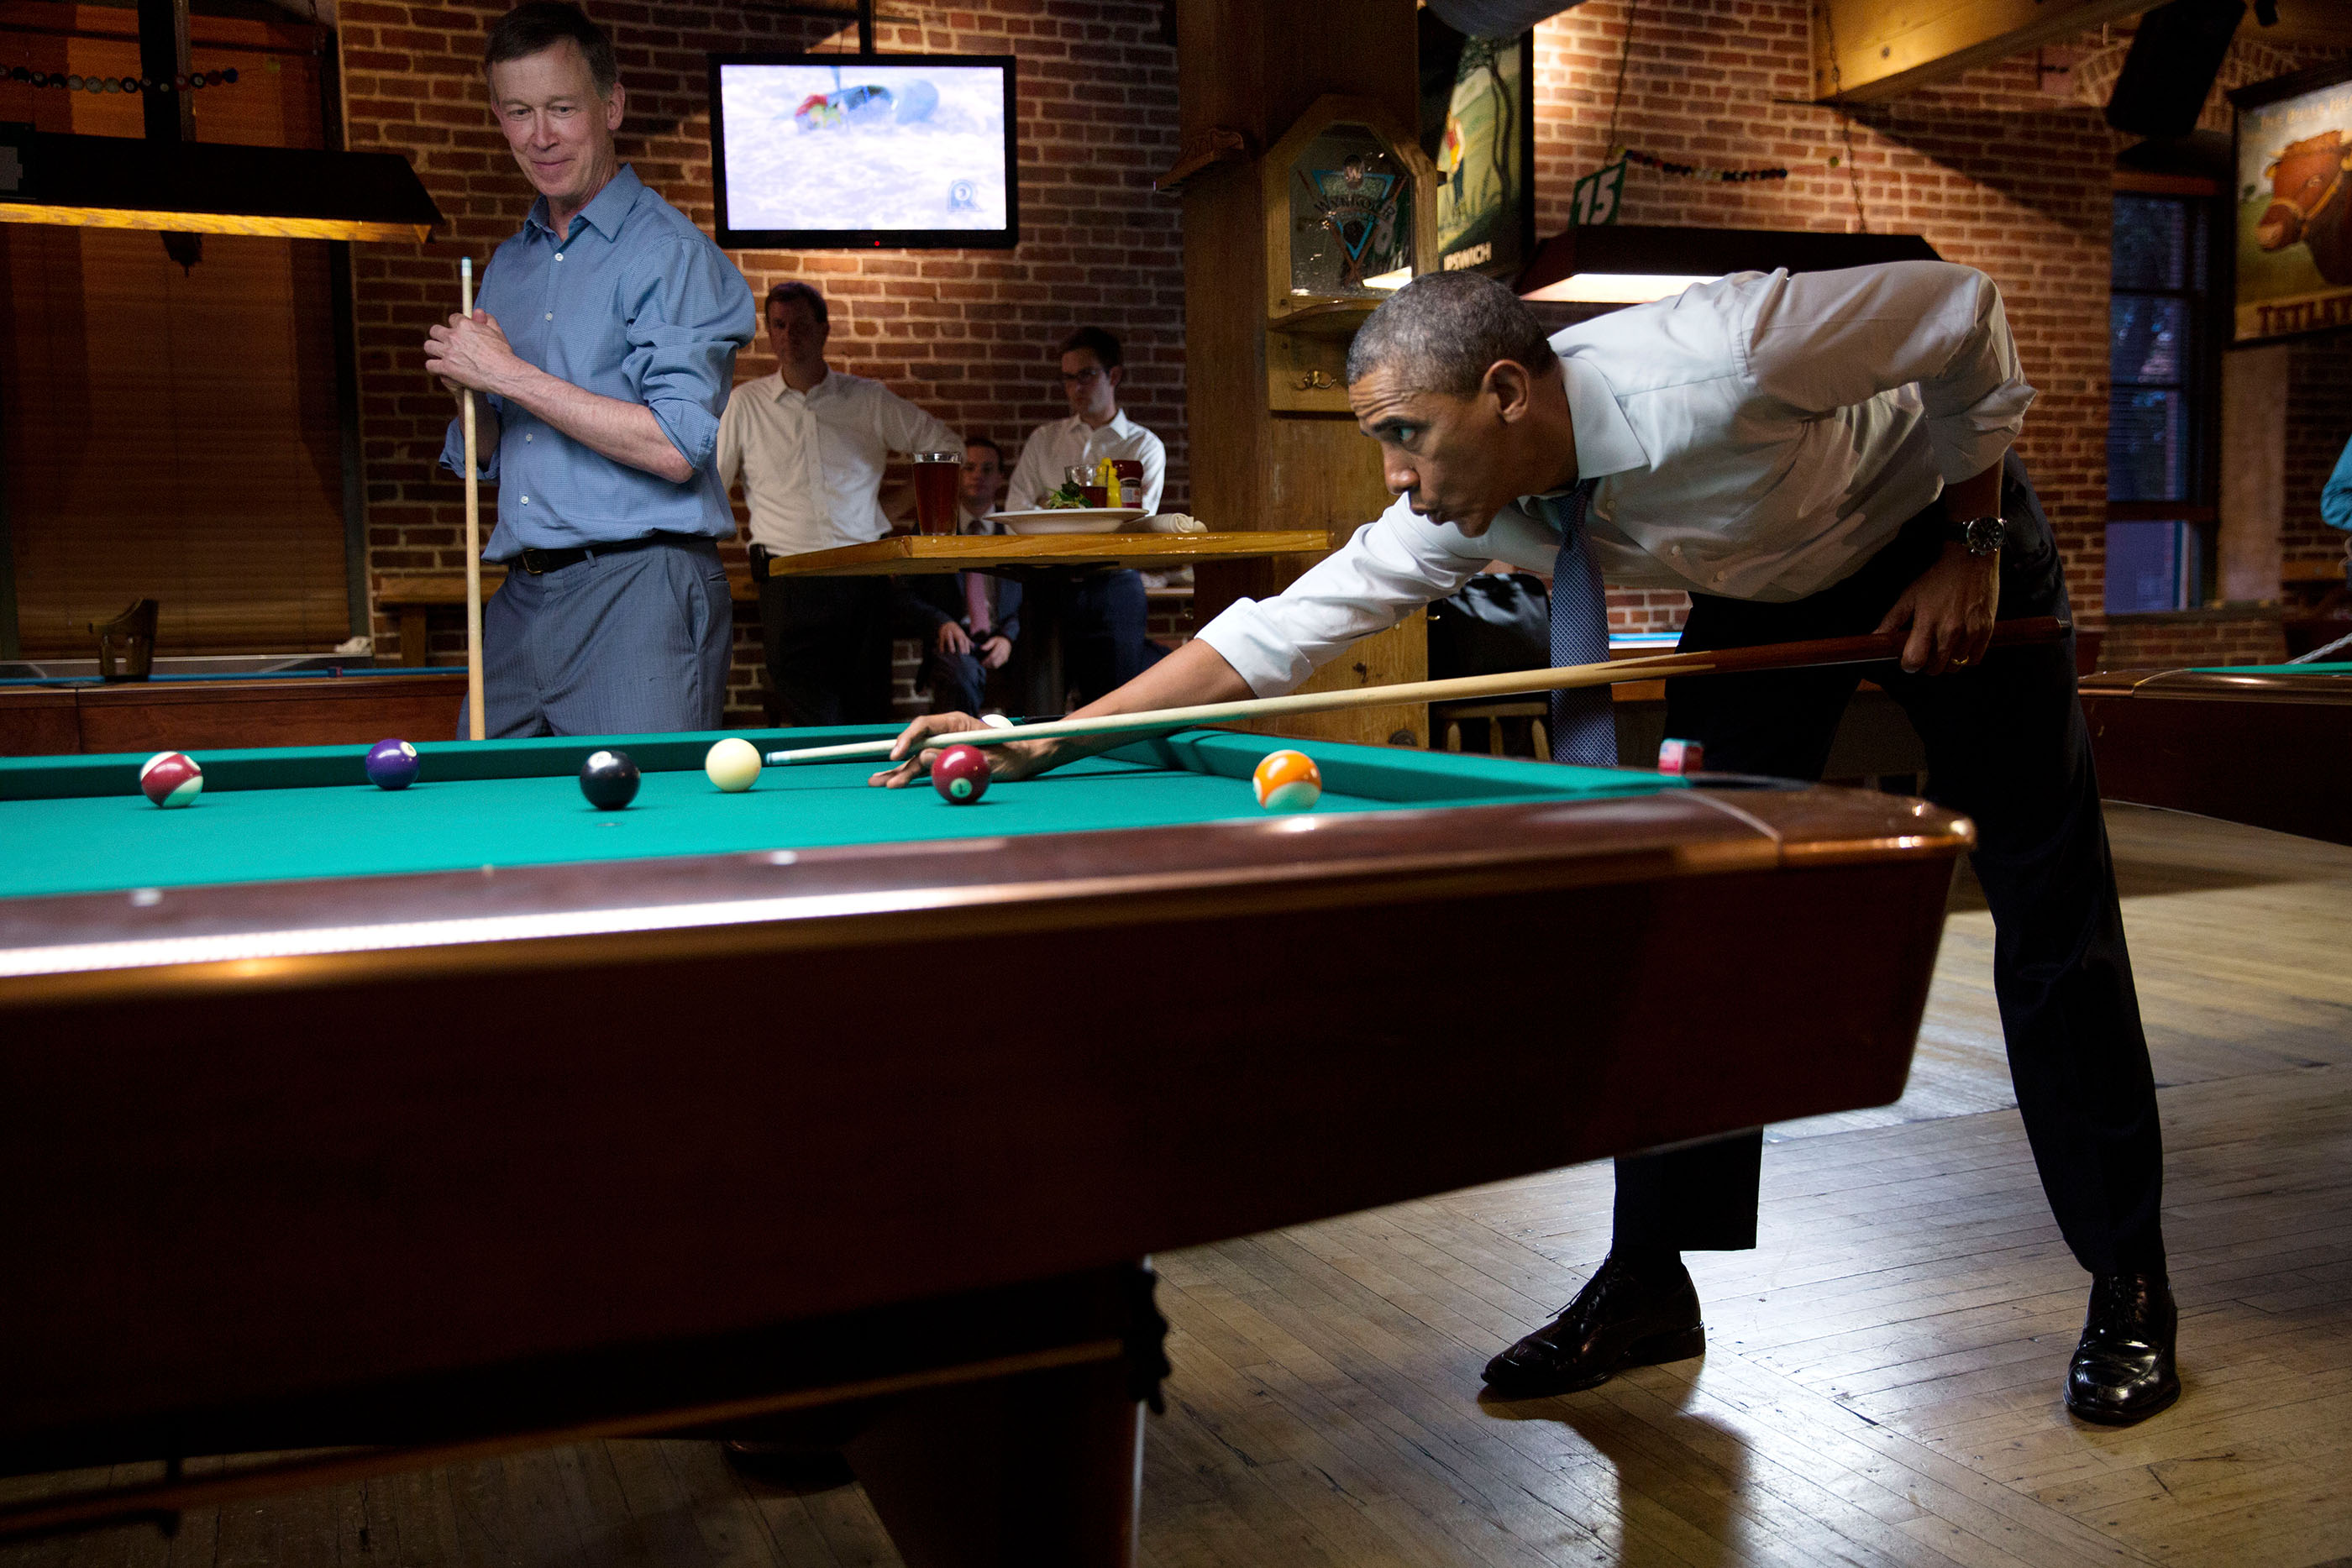 Colorado, July 8, 2014. Playing pool with Gov. John Hickenlooper in Denver. (Official White House Photo by Pete Souza)